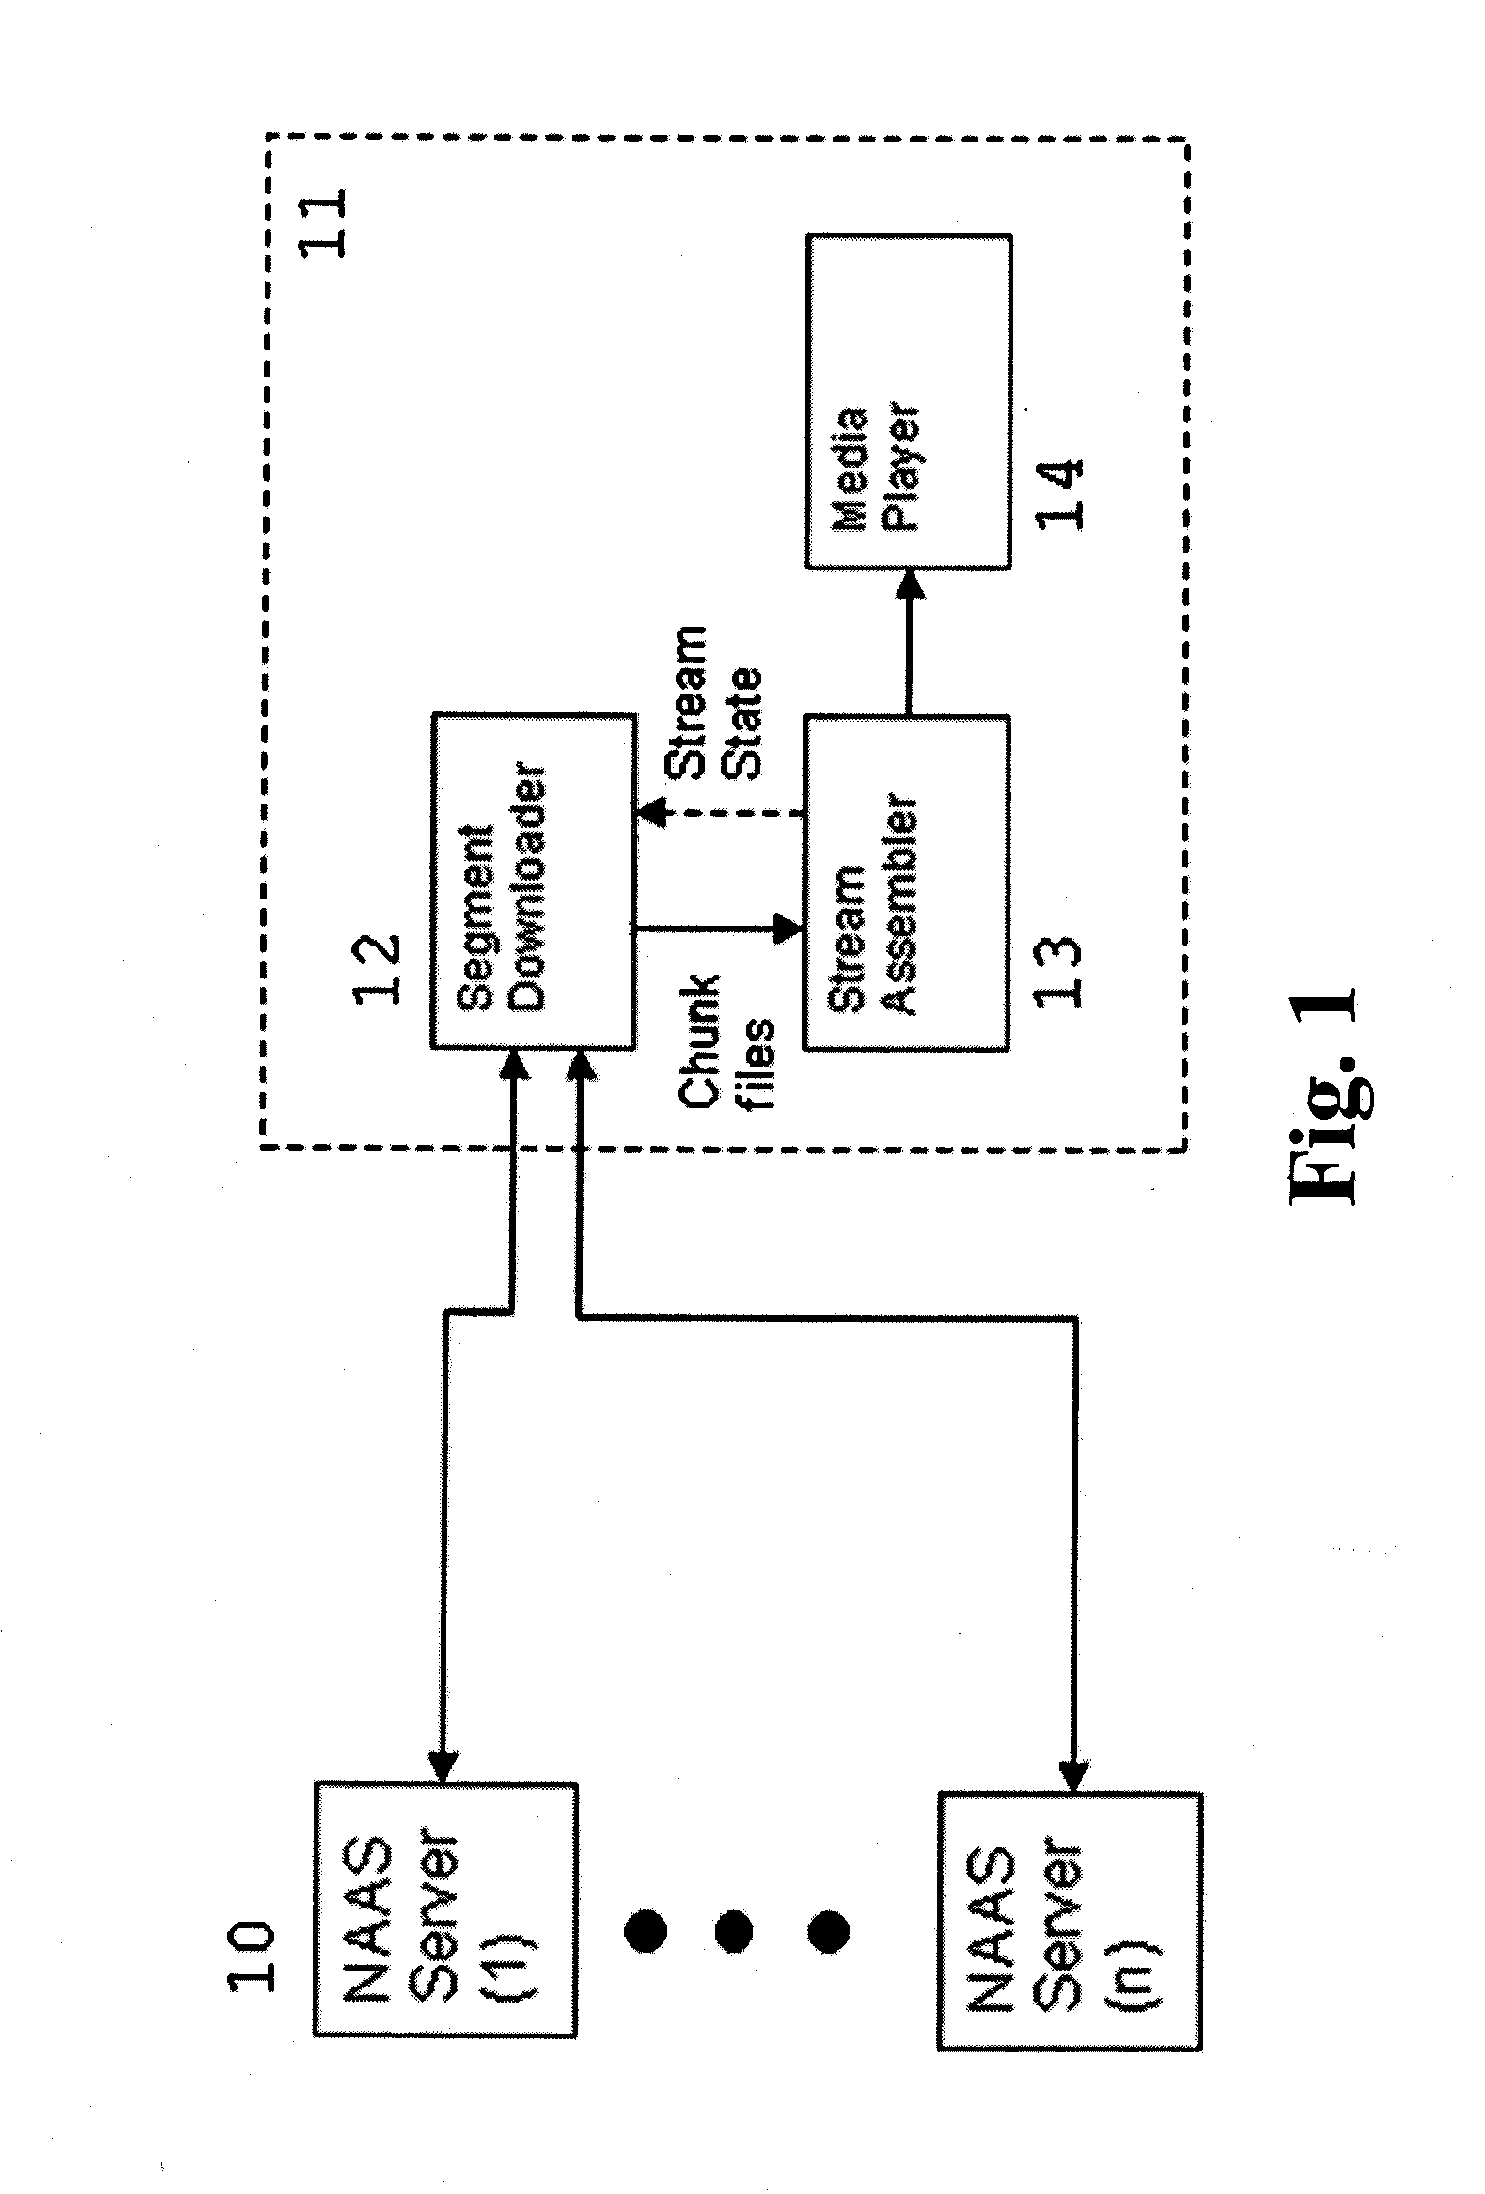 Method and system for efficient streaming video dynamic rate adaptation